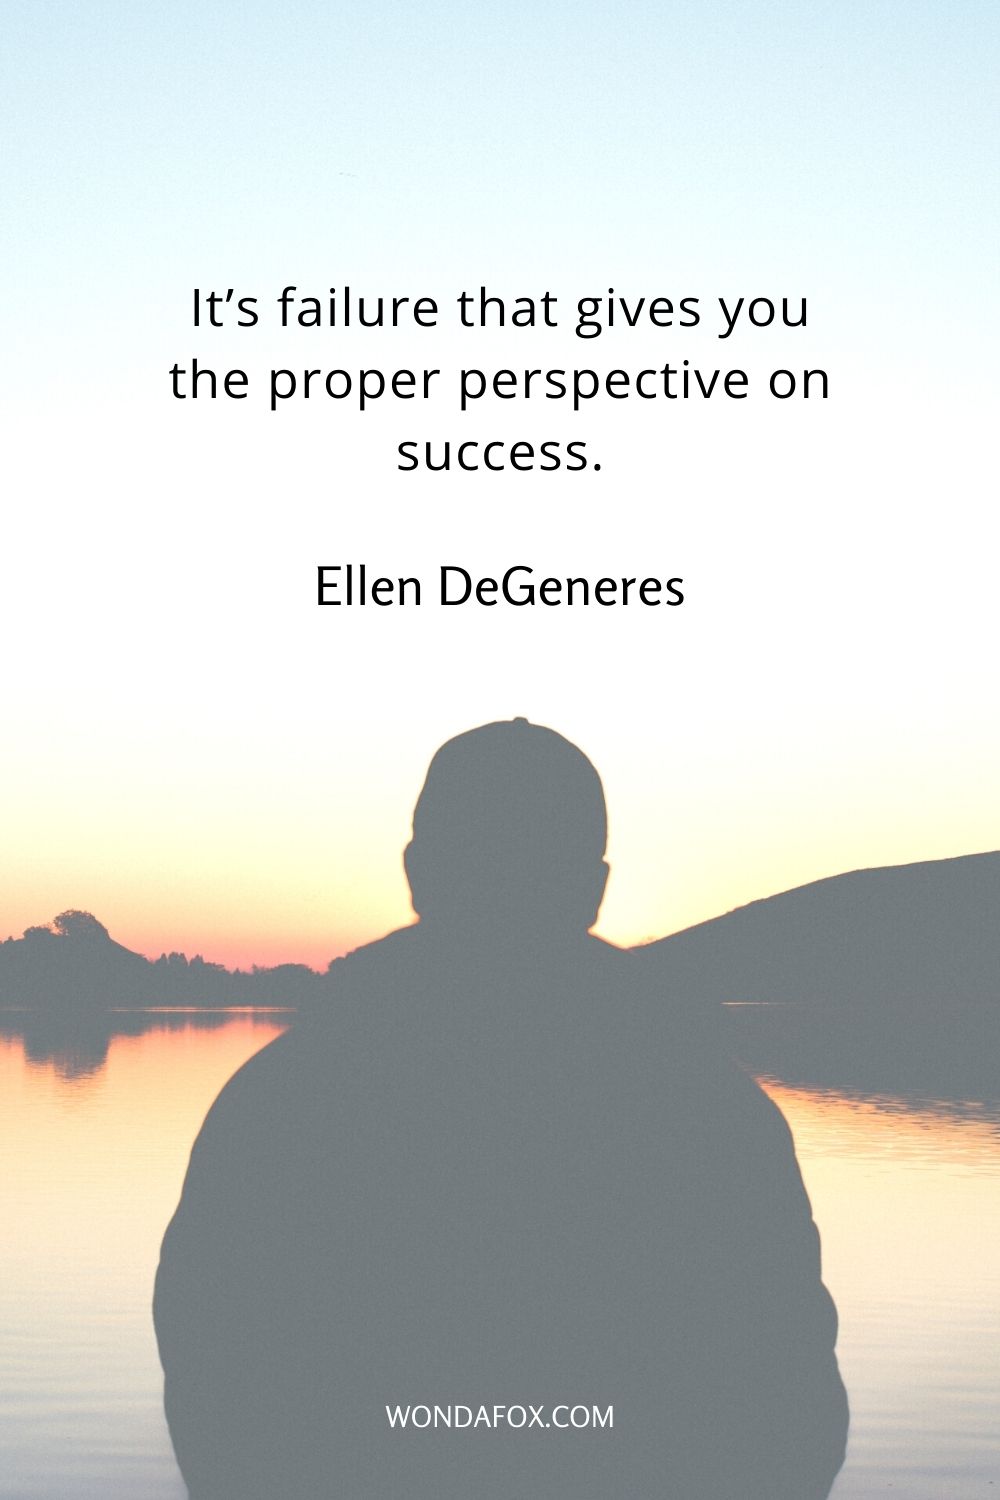 It’s failure that gives you the proper perspective on success.